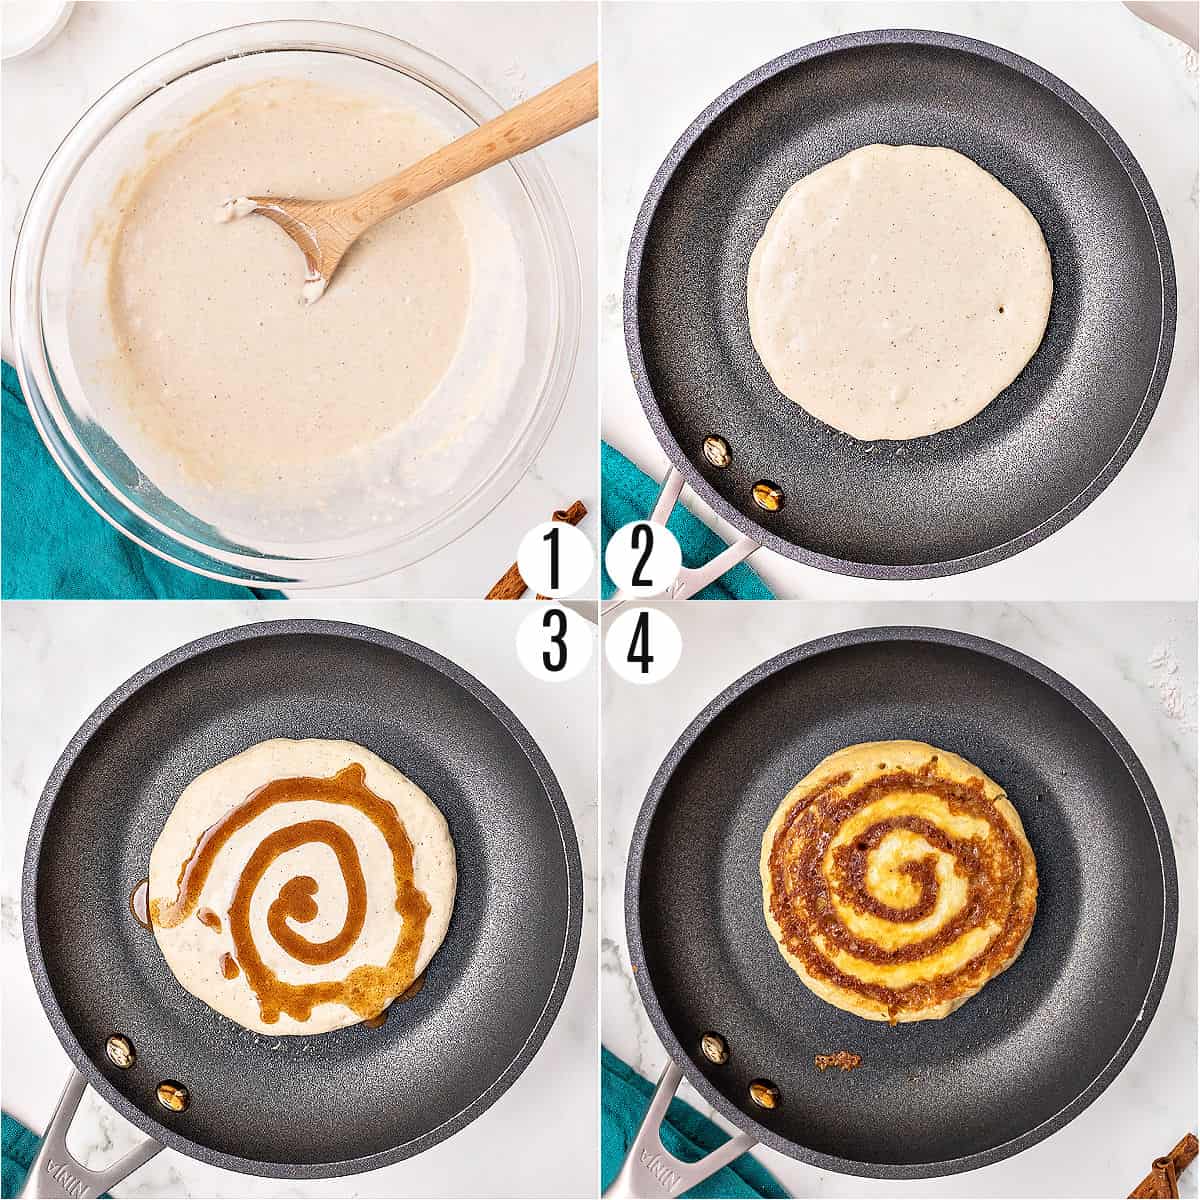 Step by step photos showing how to make cinnamon roll pancakes.